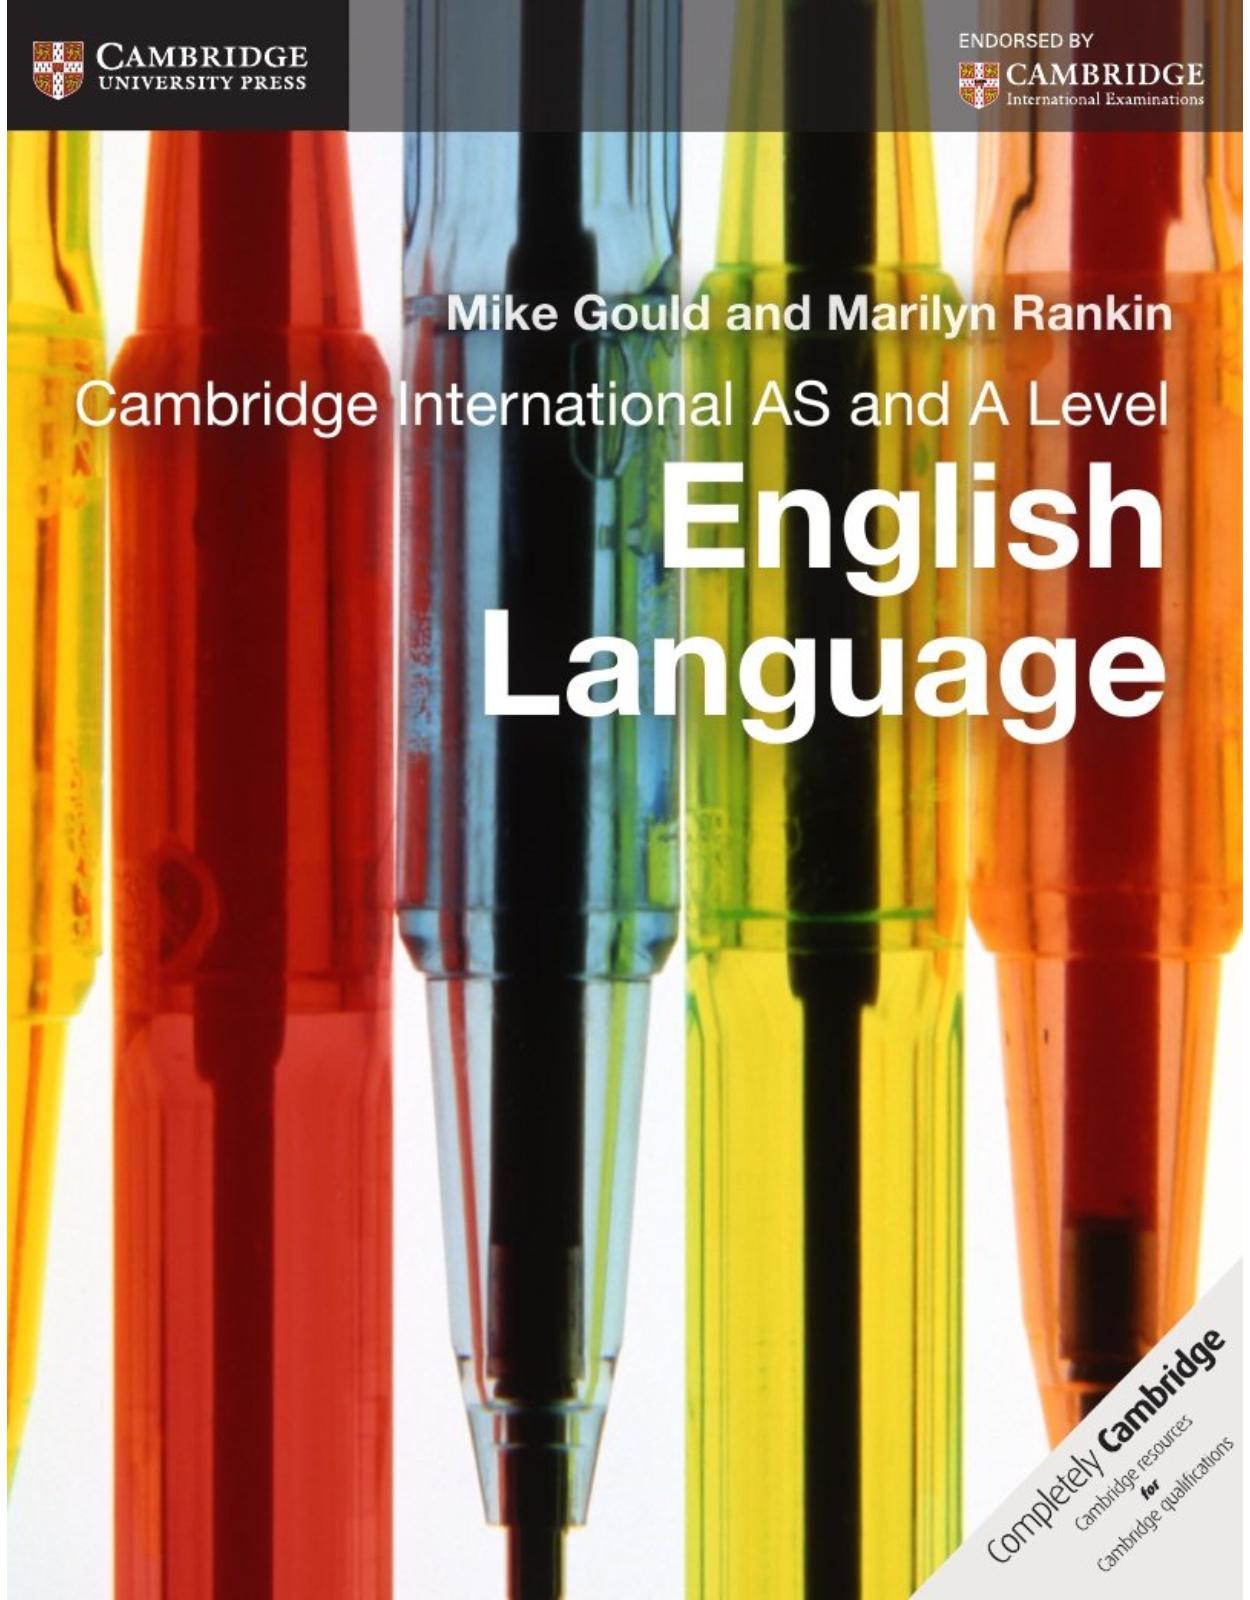 Cambridge International AS and A Level English Language Coursebook (Cambridge International Examinations) 